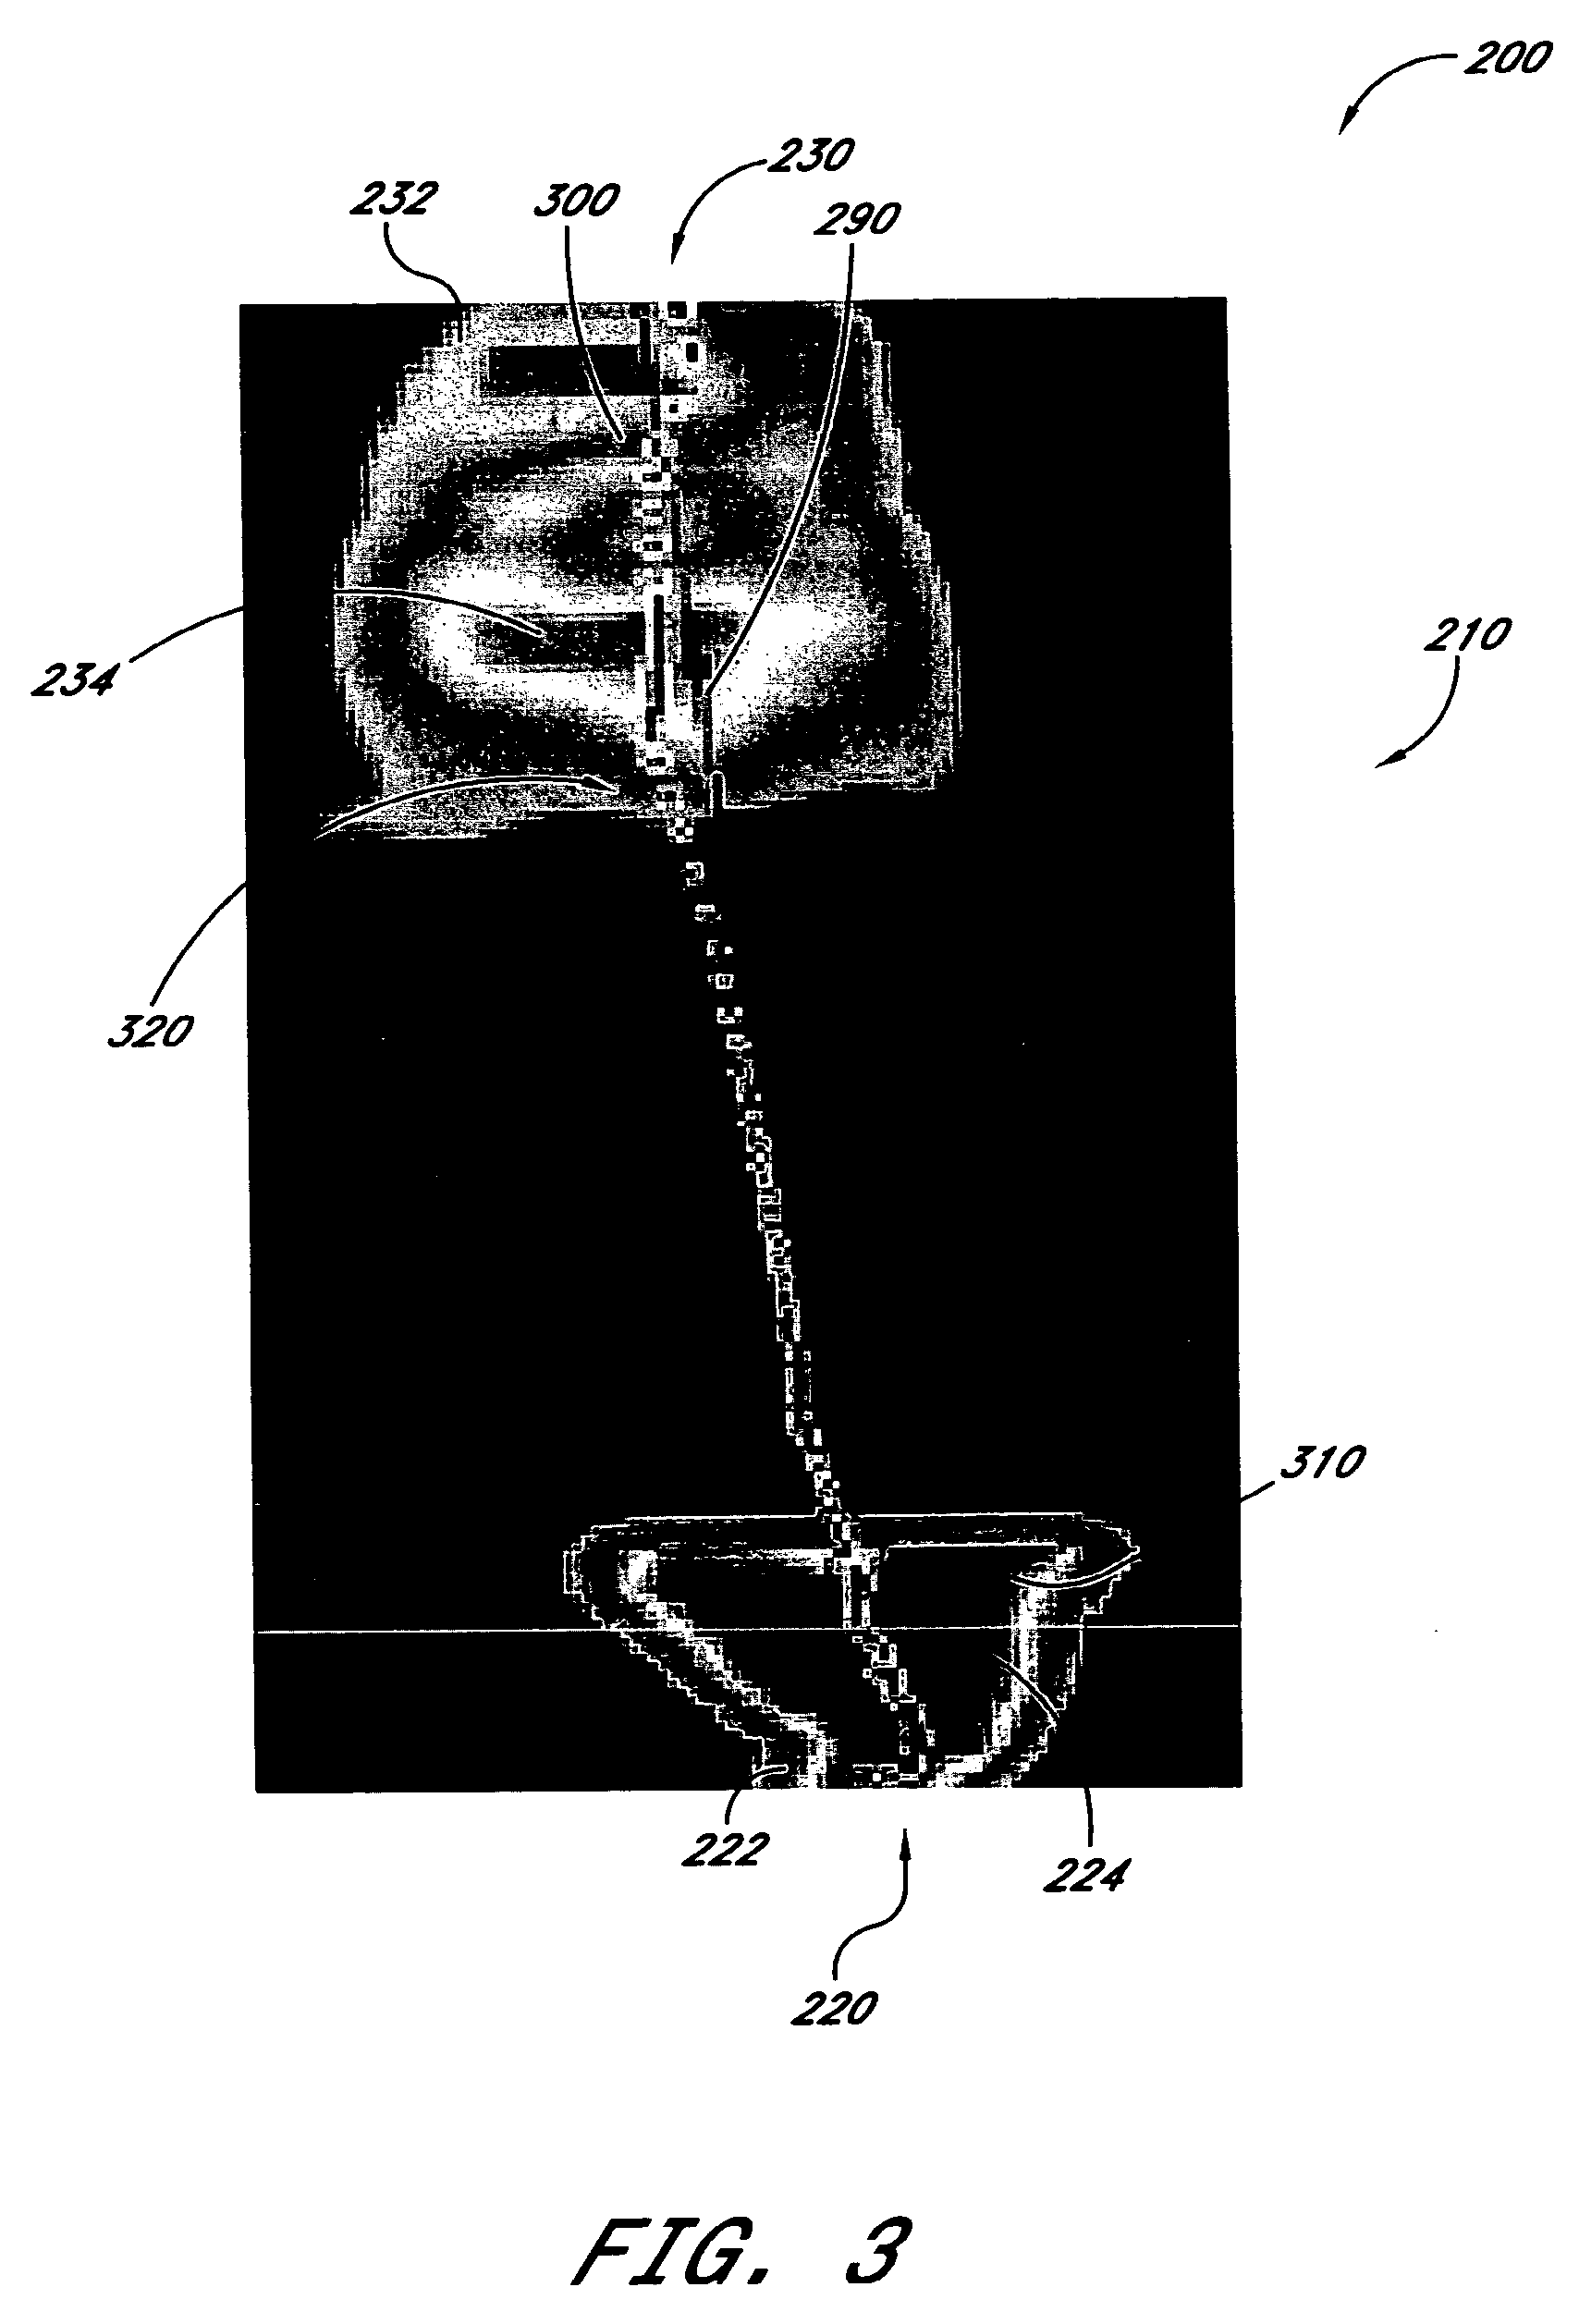 Method of measuring the performance of a prosthetic foot